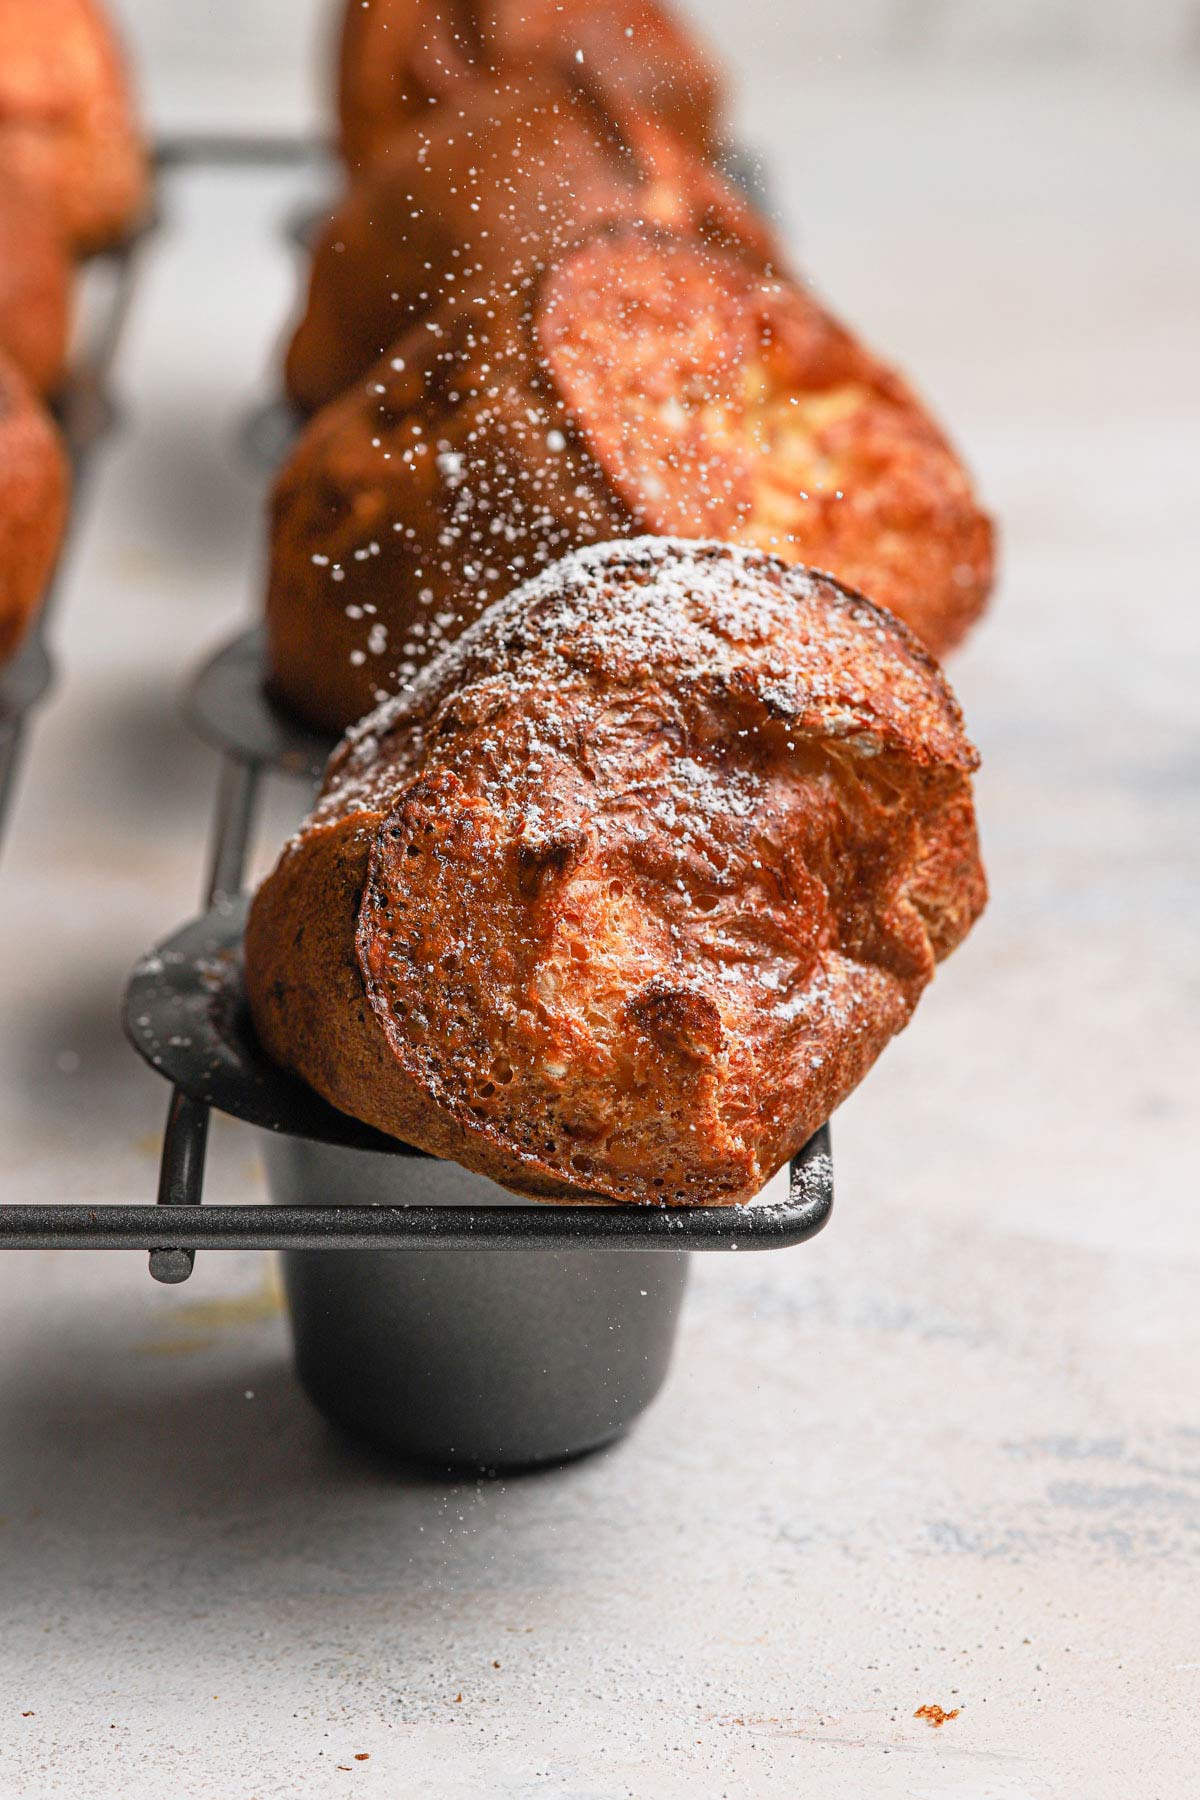 Popovers with Strawberry Butter at Neiman Marcus Cafe (and Lemon